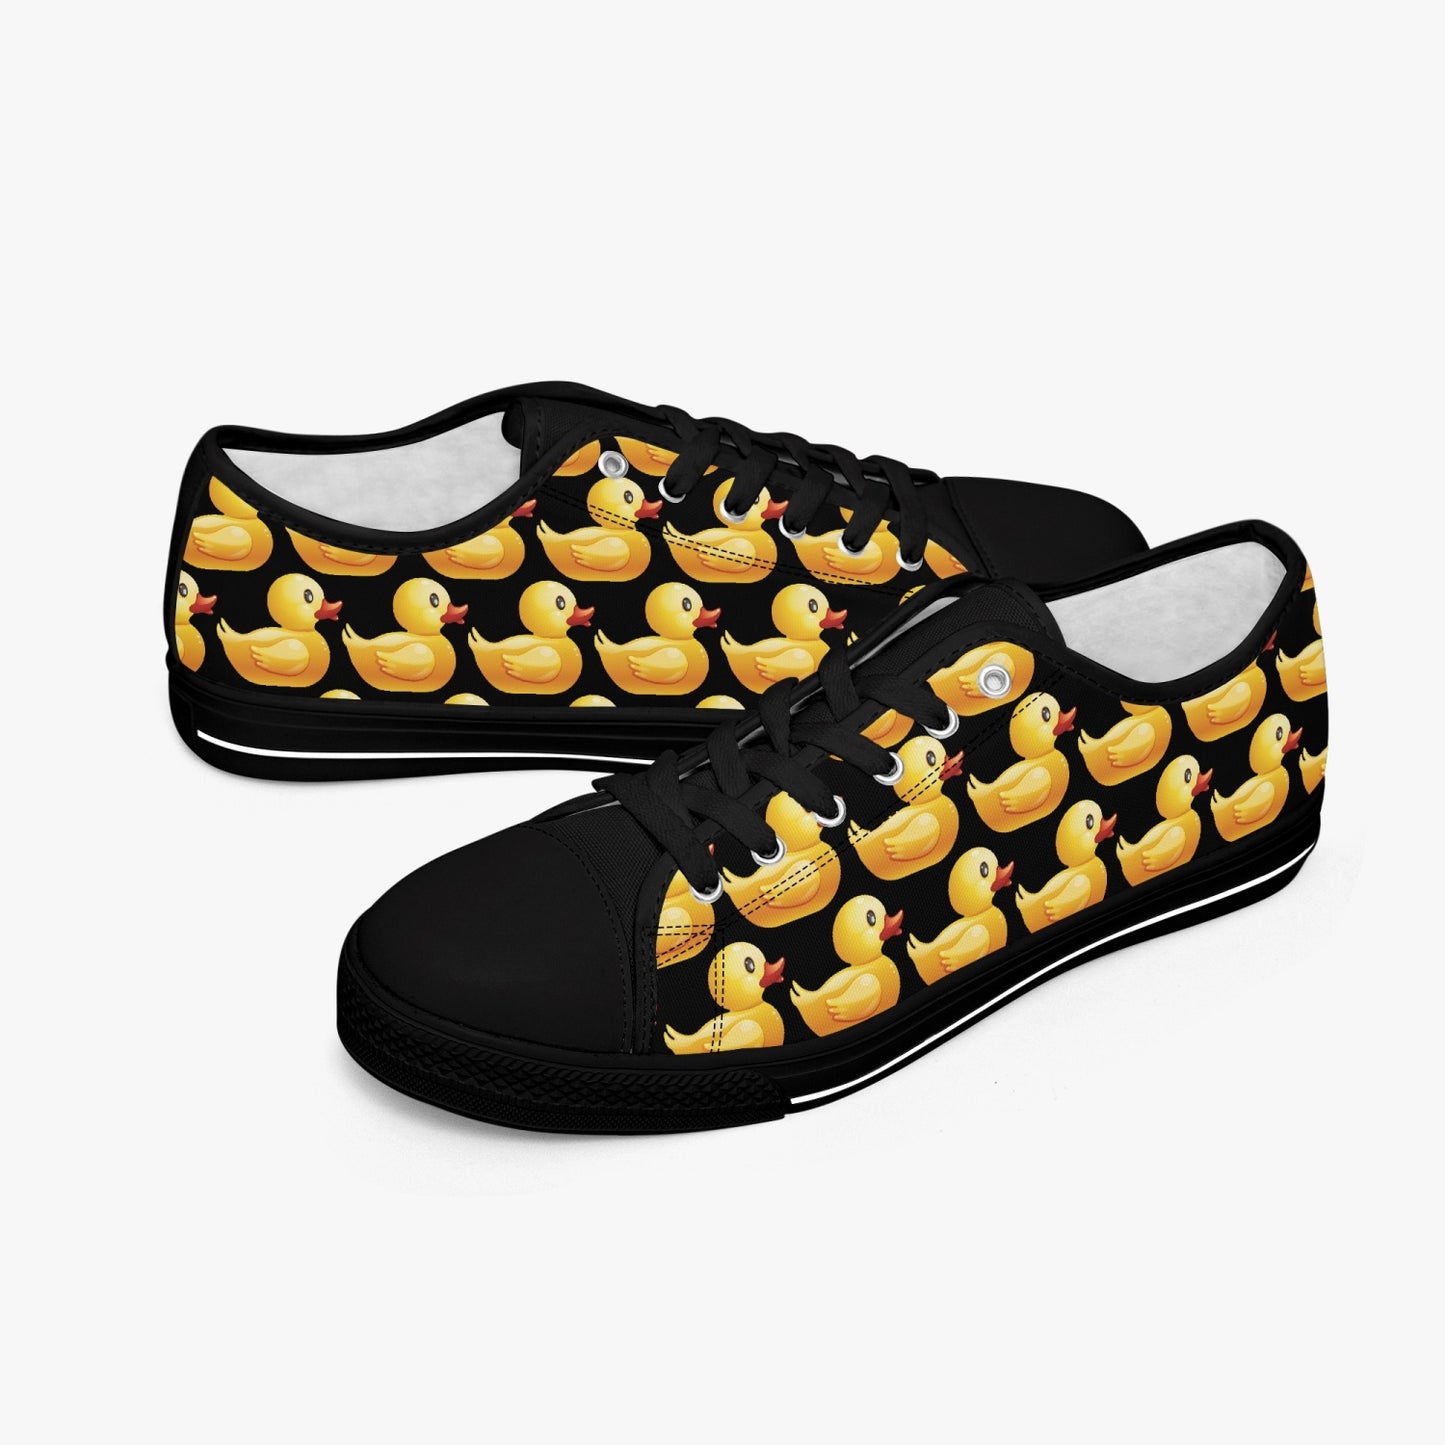 Ducky Adult Low Canvas Shoes